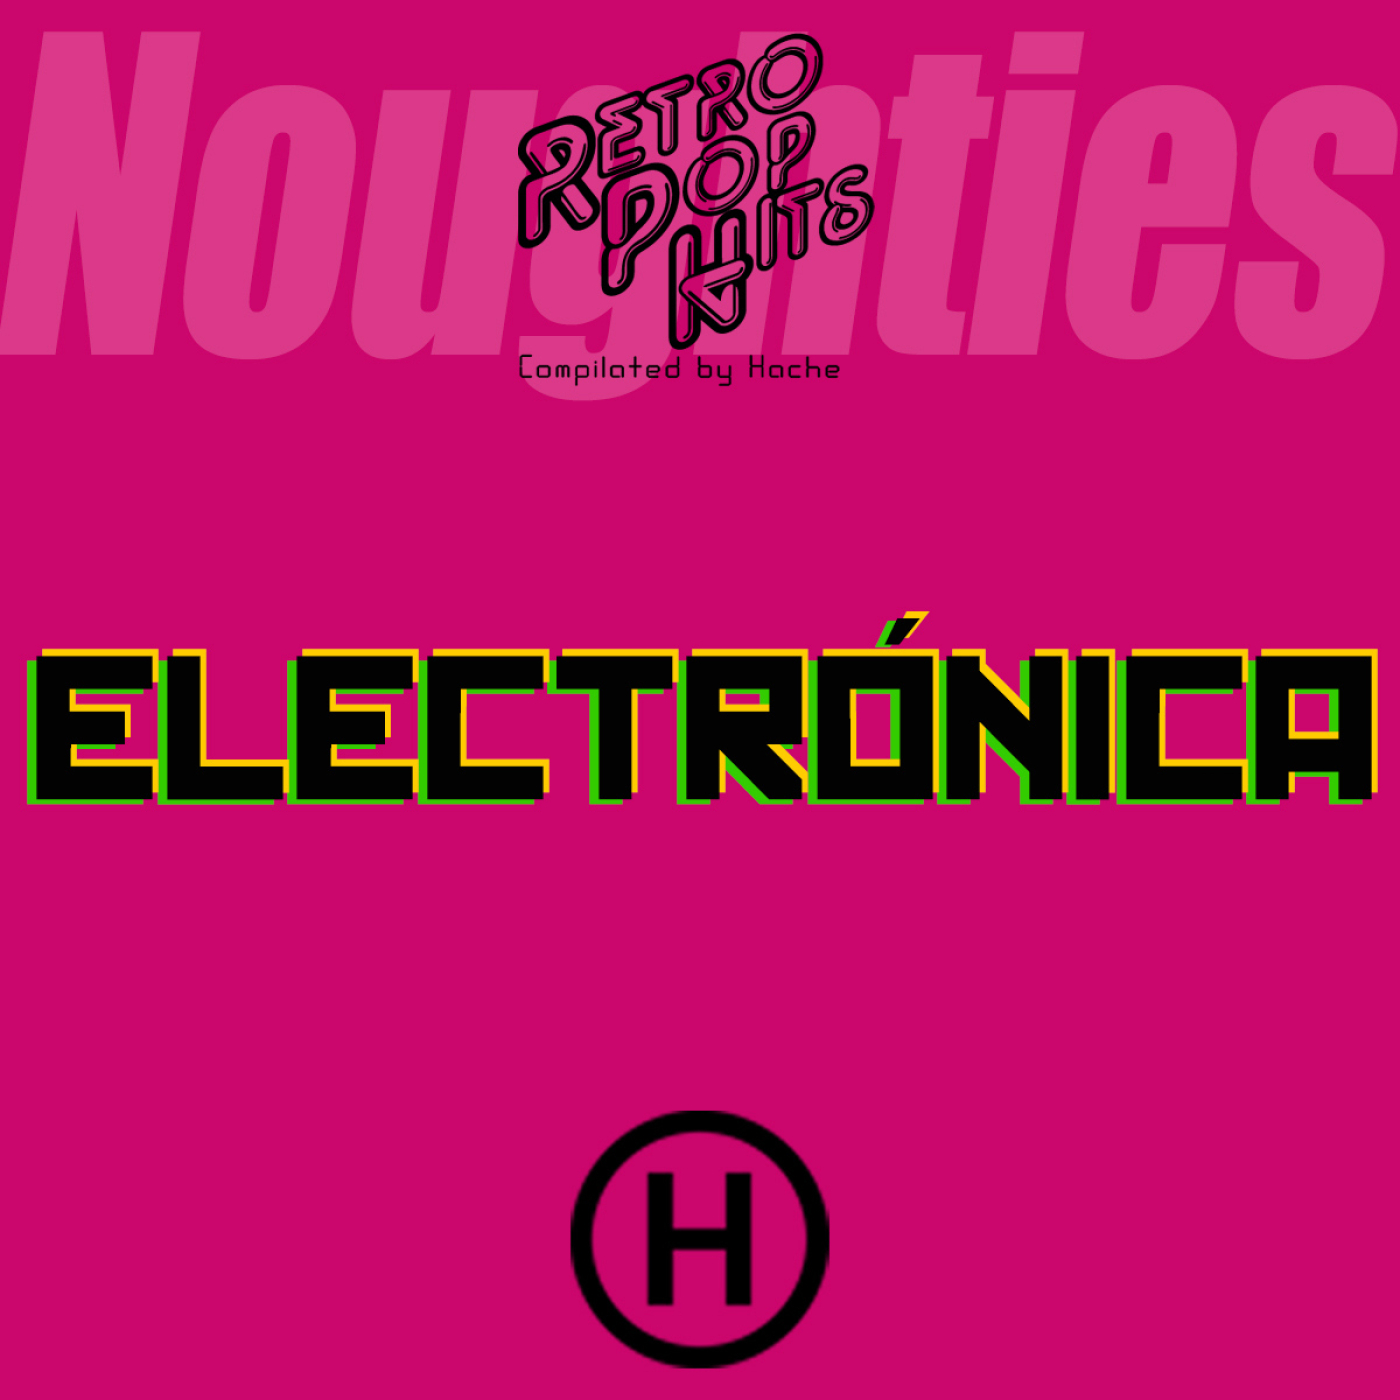 00's Electrónica (Compilated by Hache)